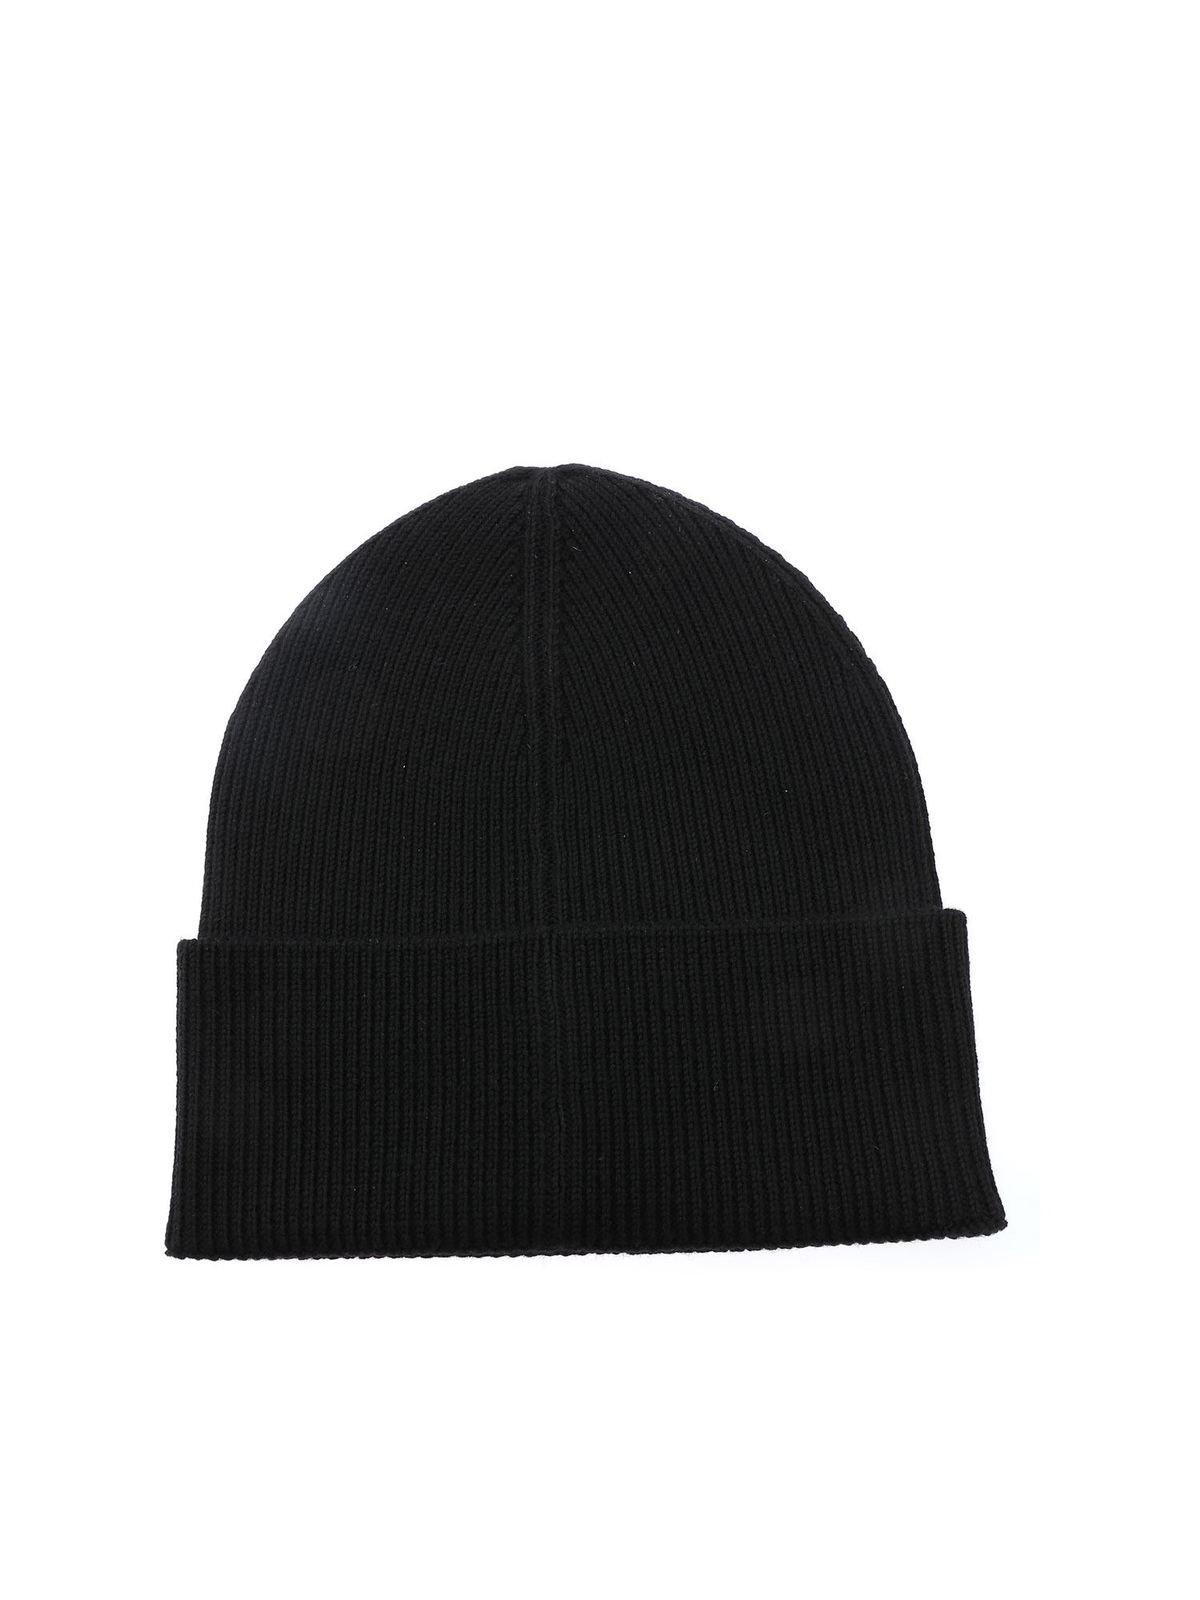 Dsquared2 - Patch Icon beanie in black - beanies - KNM000101W03933M063